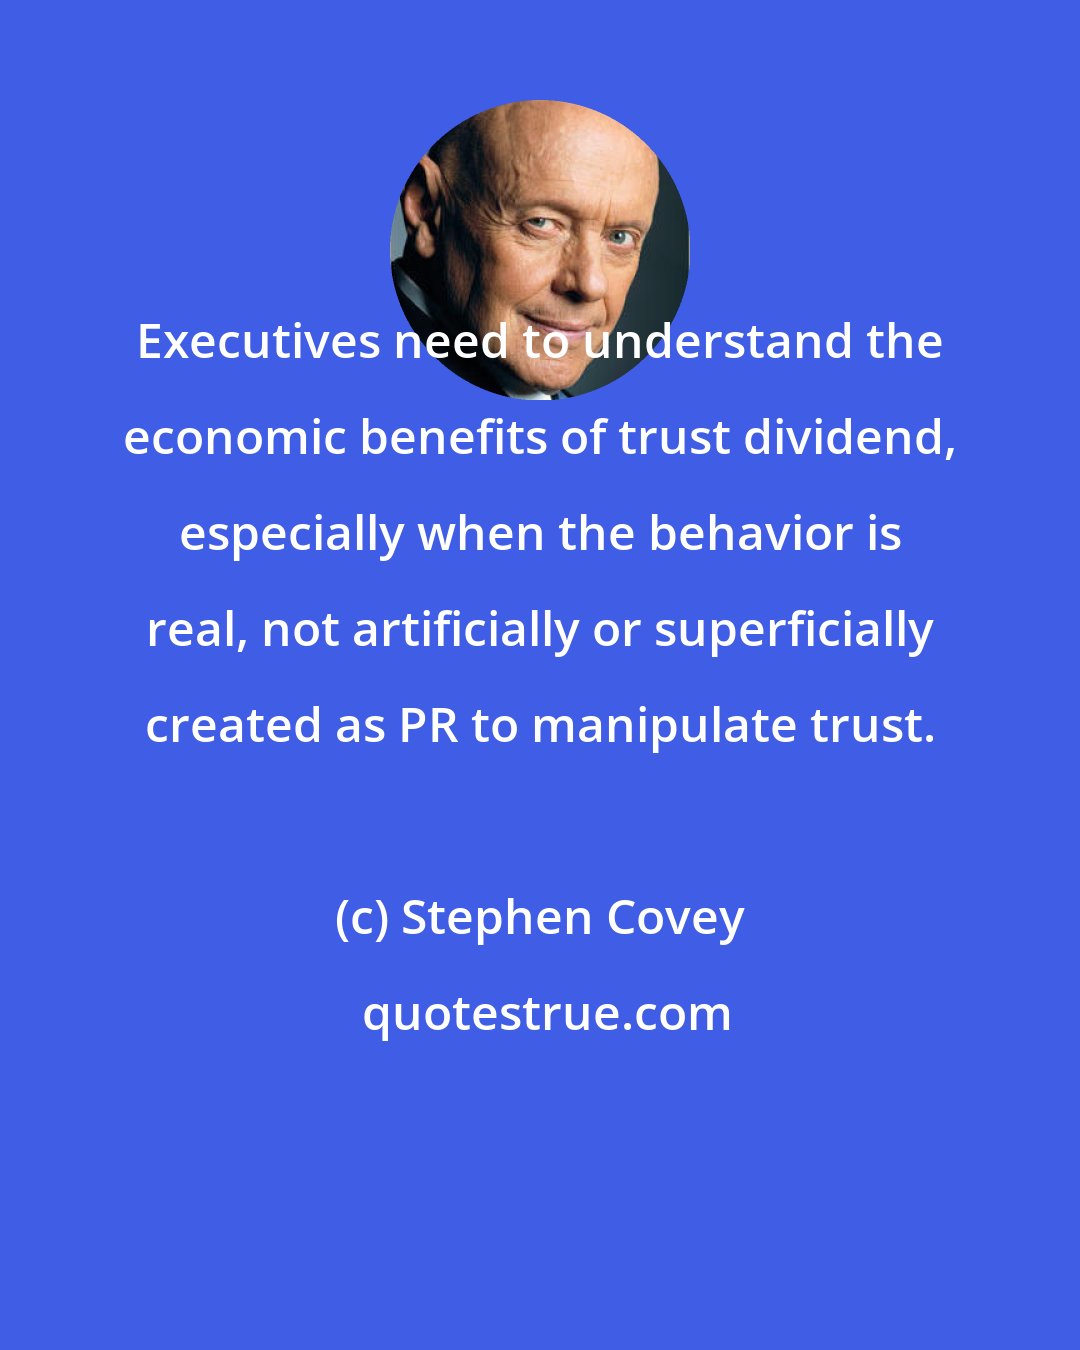 Stephen Covey: Executives need to understand the economic benefits of trust dividend, especially when the behavior is real, not artificially or superficially created as PR to manipulate trust.